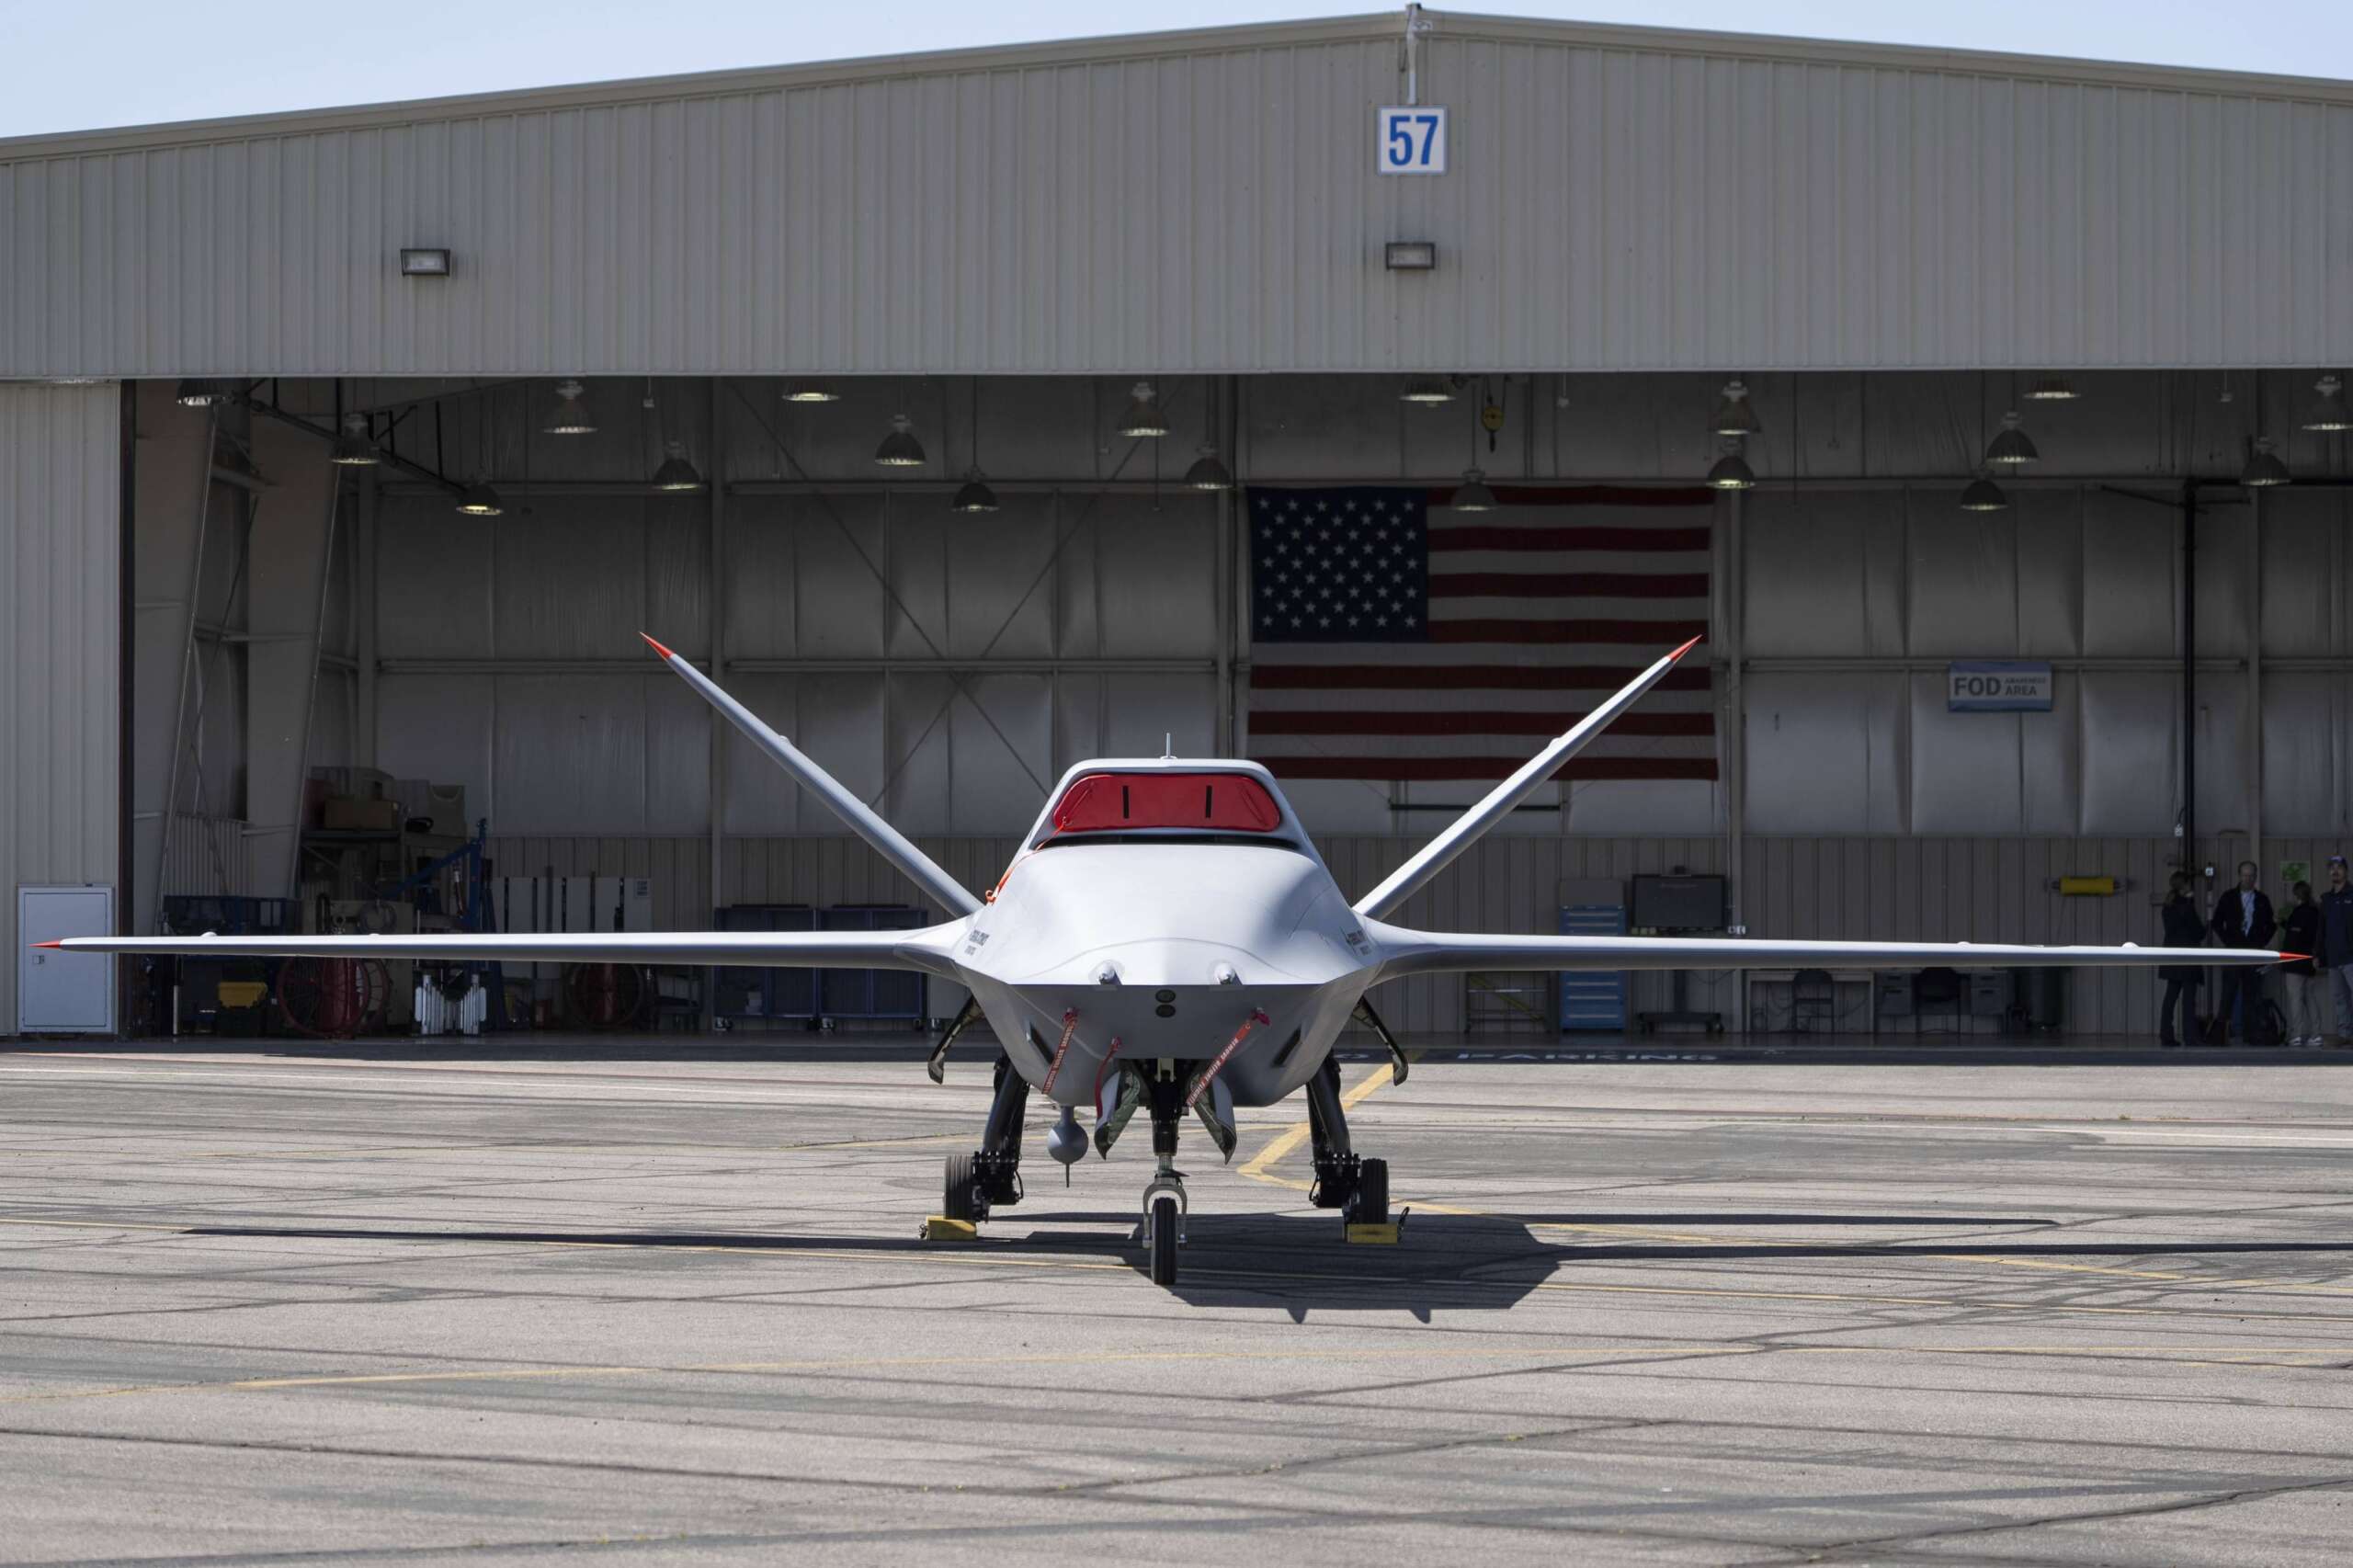 It is ‘too early’ for an Army drone branch, Rainey says